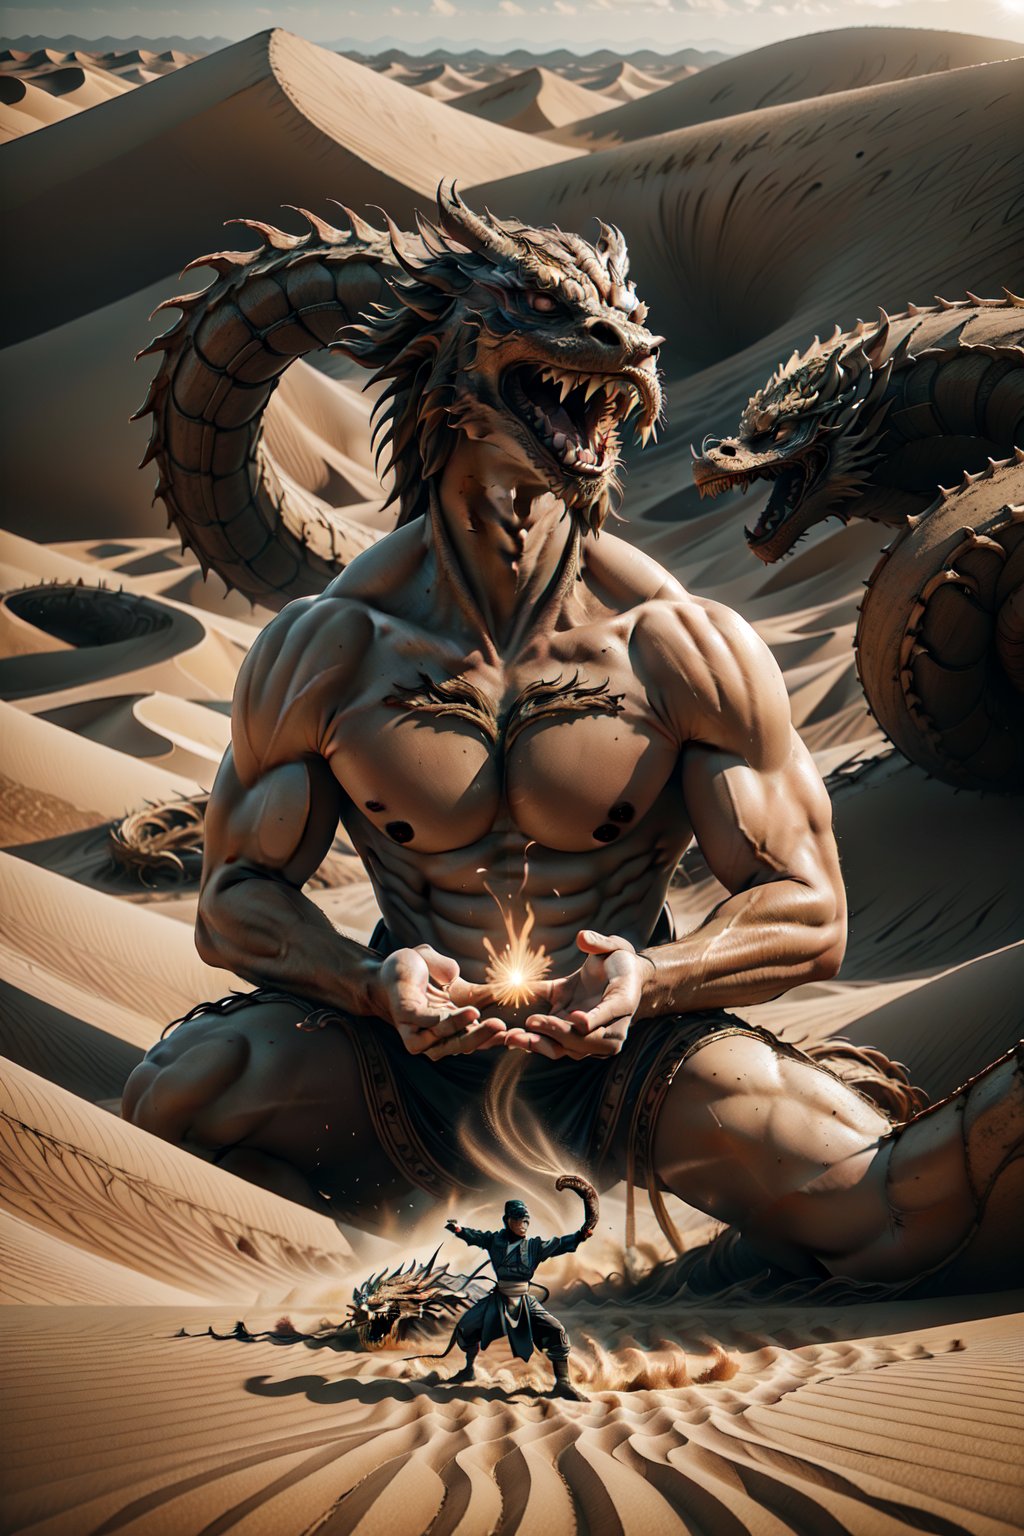 A ninja in realistic style performing Earth-style ninjutsu in the desert, summoning a grand and massive Chinese dragon made of sand and earth. The dragon twists and curls majestically through the air, its form detailed and intricate, reflecting the power and precision of the ninja's control. The desert landscape stretches far into the background, with dunes and the clear sky enhancing the scene's epic nature. This moment captures the essence of ancient mysticism blended with martial prowess.,Dune Style